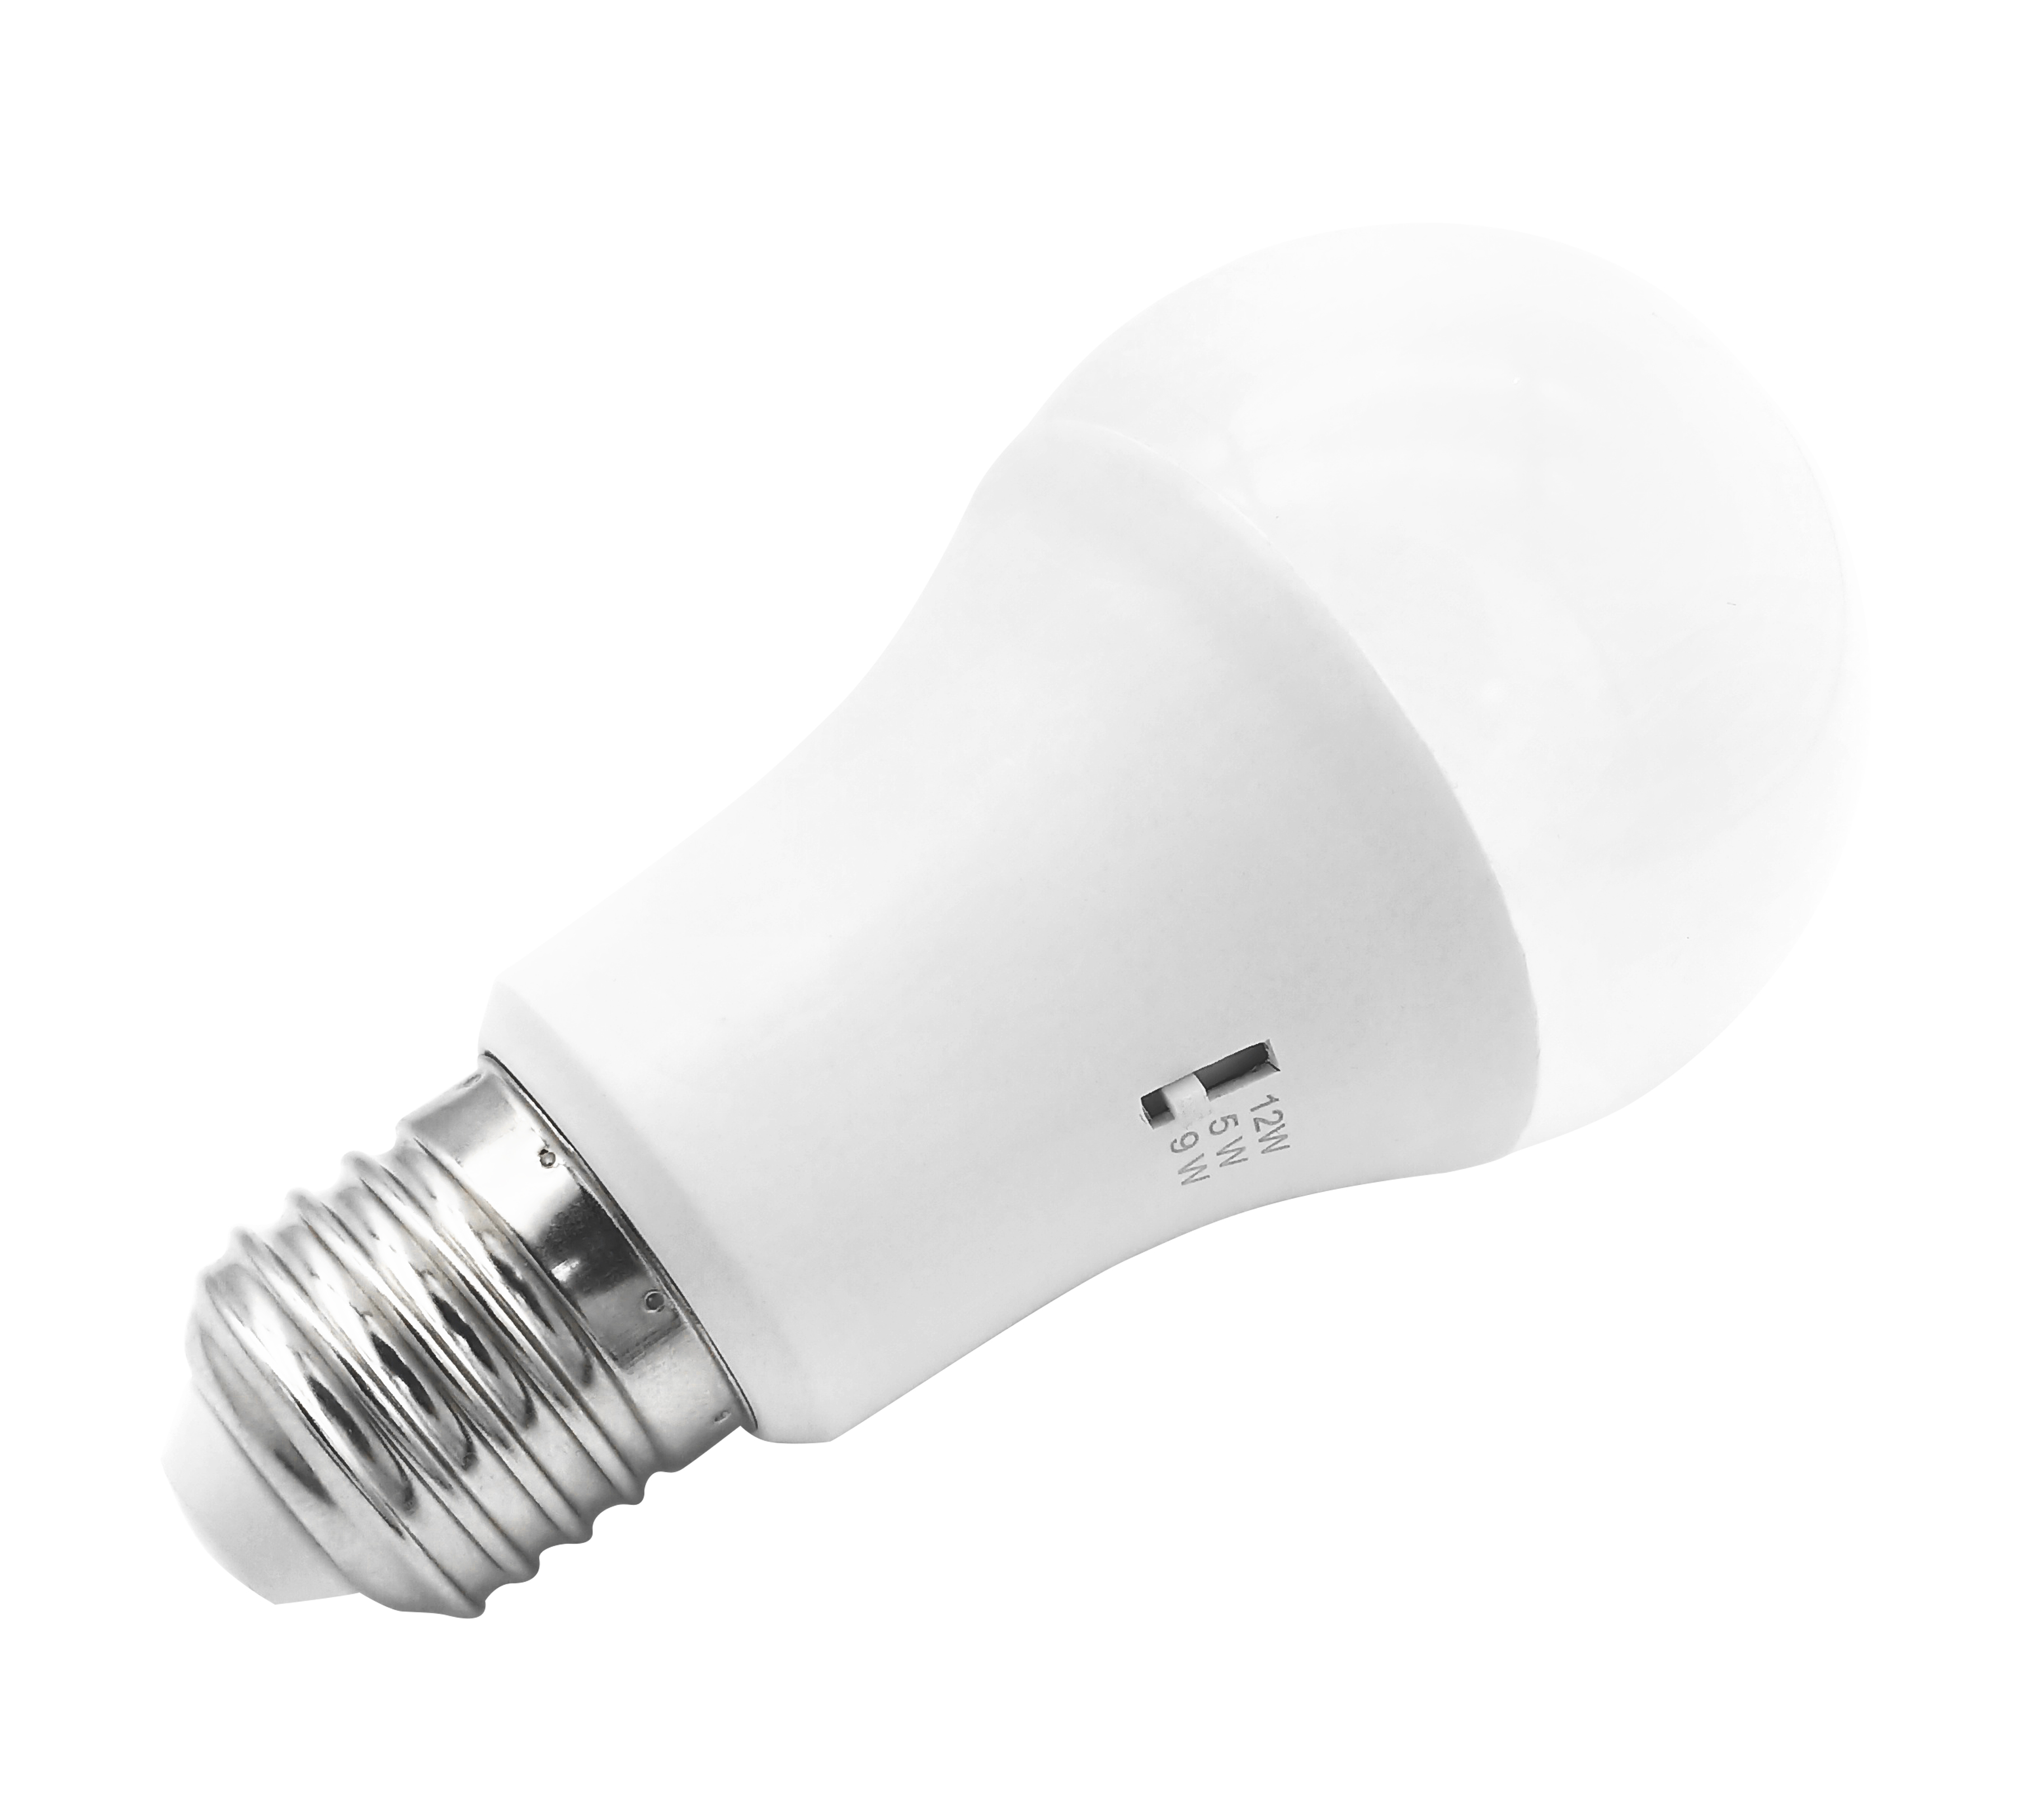 LED 9 in 1 A60 BULB